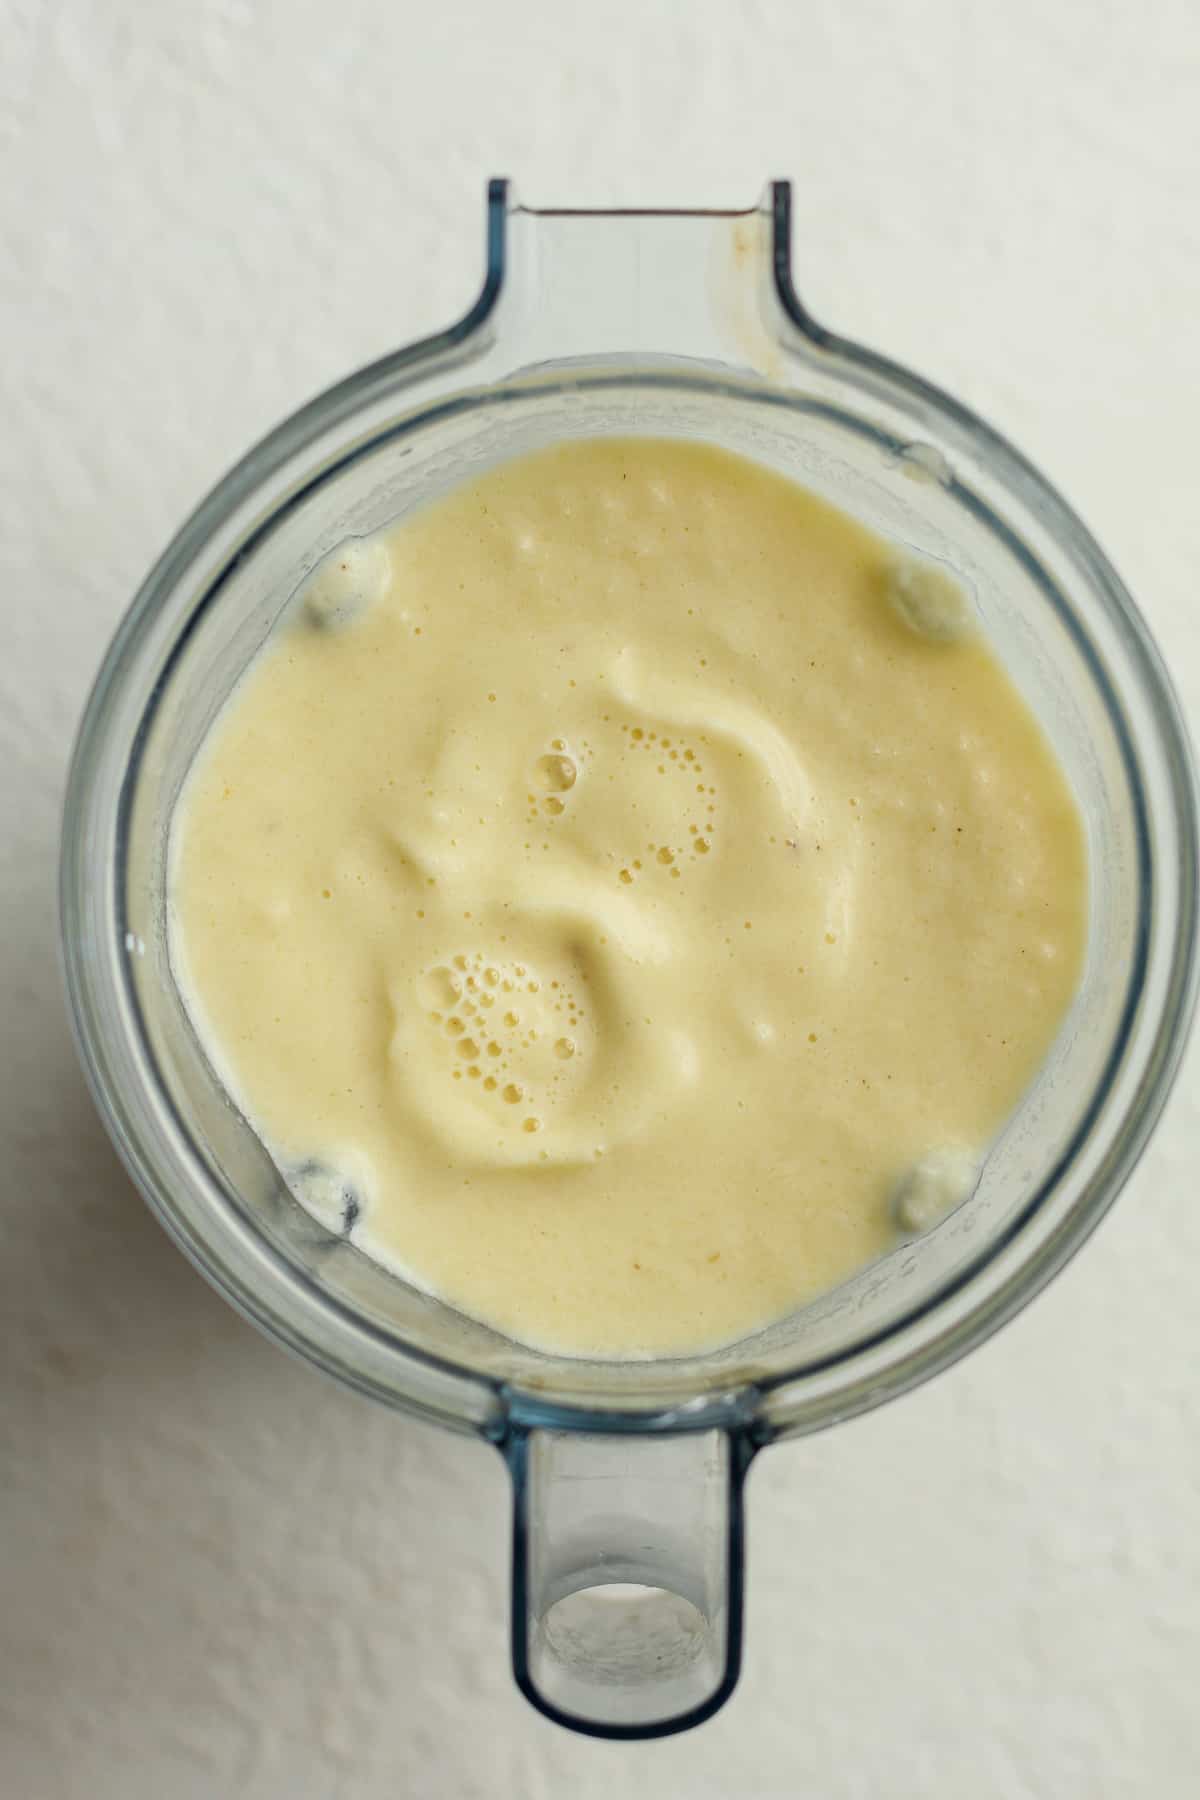 A blender of frozen pineapple banana smoothie mixture.